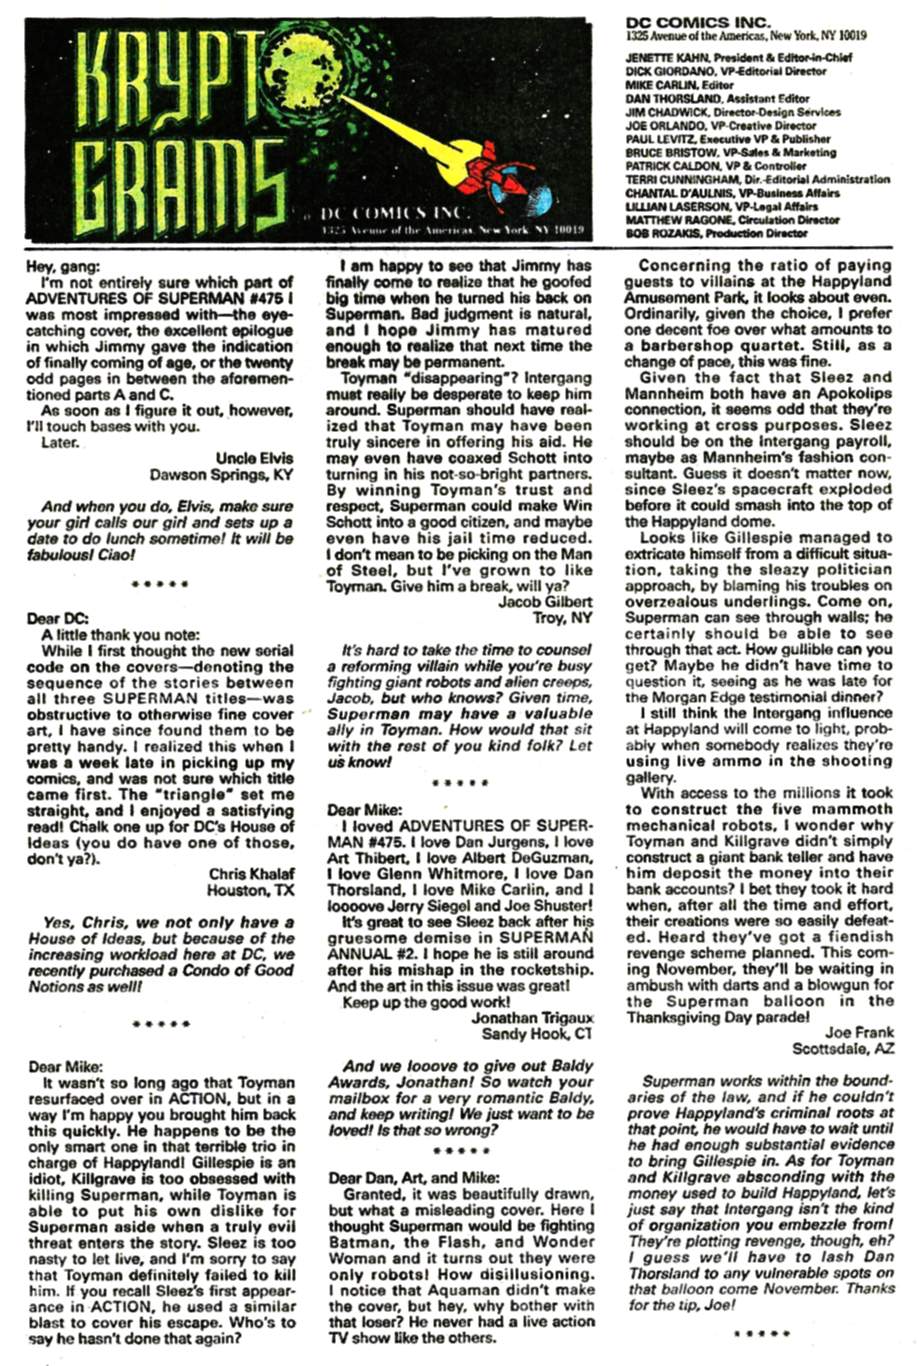 Adventures of Superman (1987) 479 Page 22